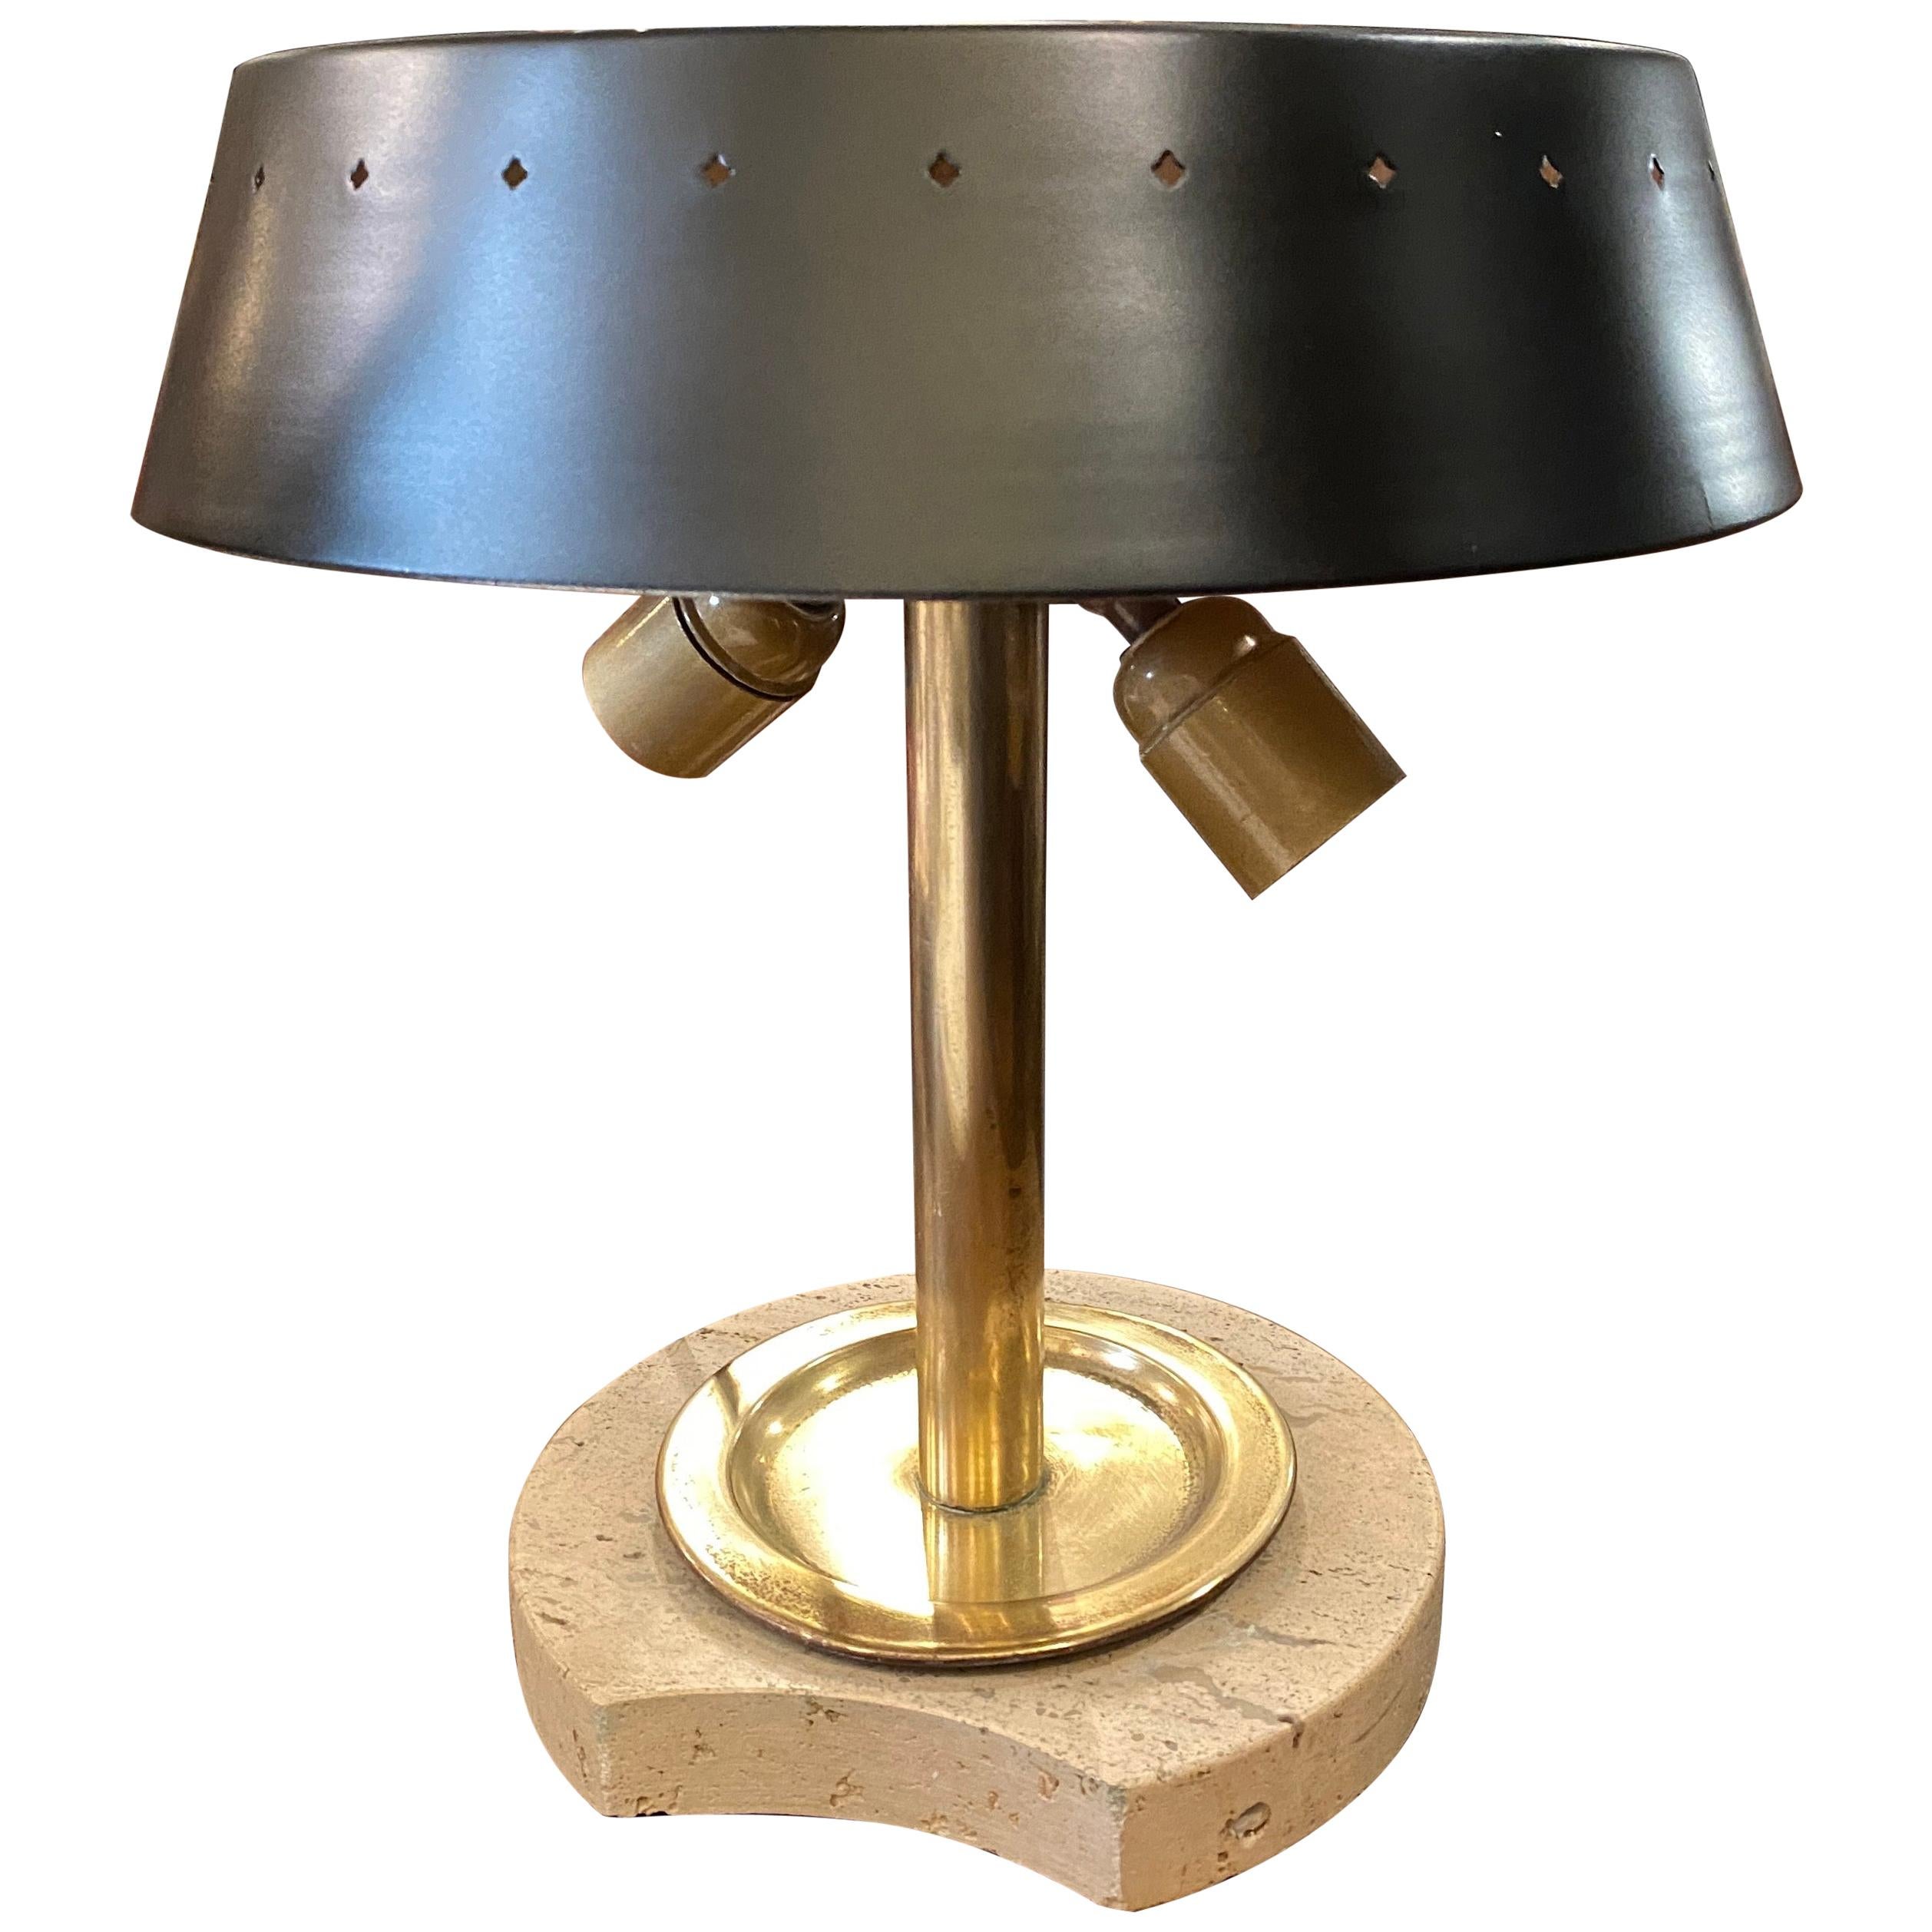 1960s Mid-Century Modern Travertine Marble and Brass Italian Table Lamp For Sale